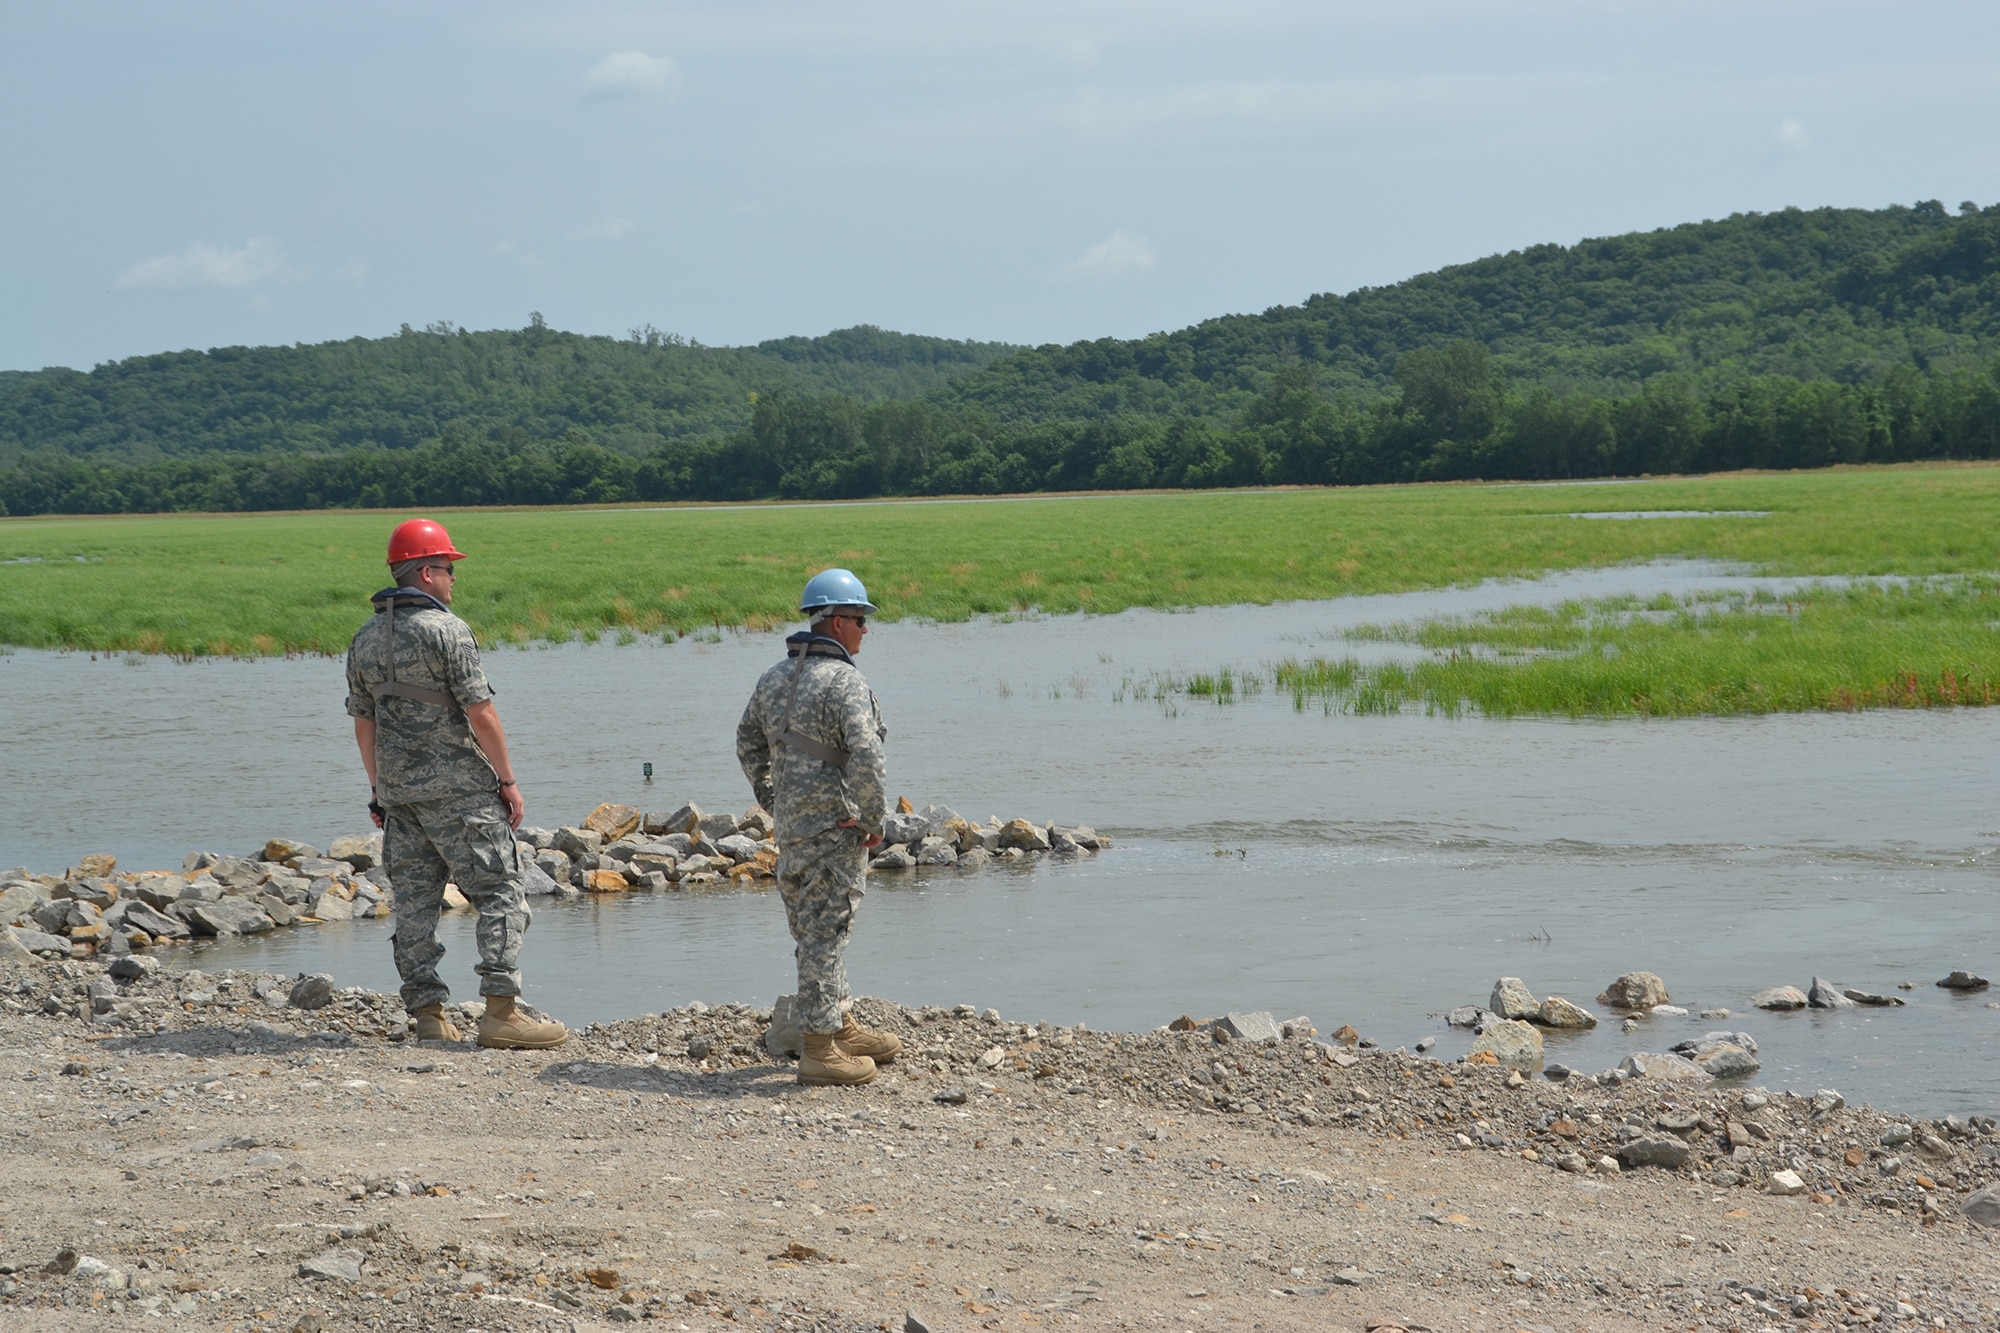 An airman from the Missouri Air National Guard and a soldier from the Kansas National Guard drive along federal levee 471-460-R near St. Joseph, Mo., June 20, 2011. The Missouri and Kansas National Guards are providing joint levee patrol on an approximately 10 mile stretch along the Missouri River. (U.S. Air Force photo by Staff Sgt. Michael Crane)